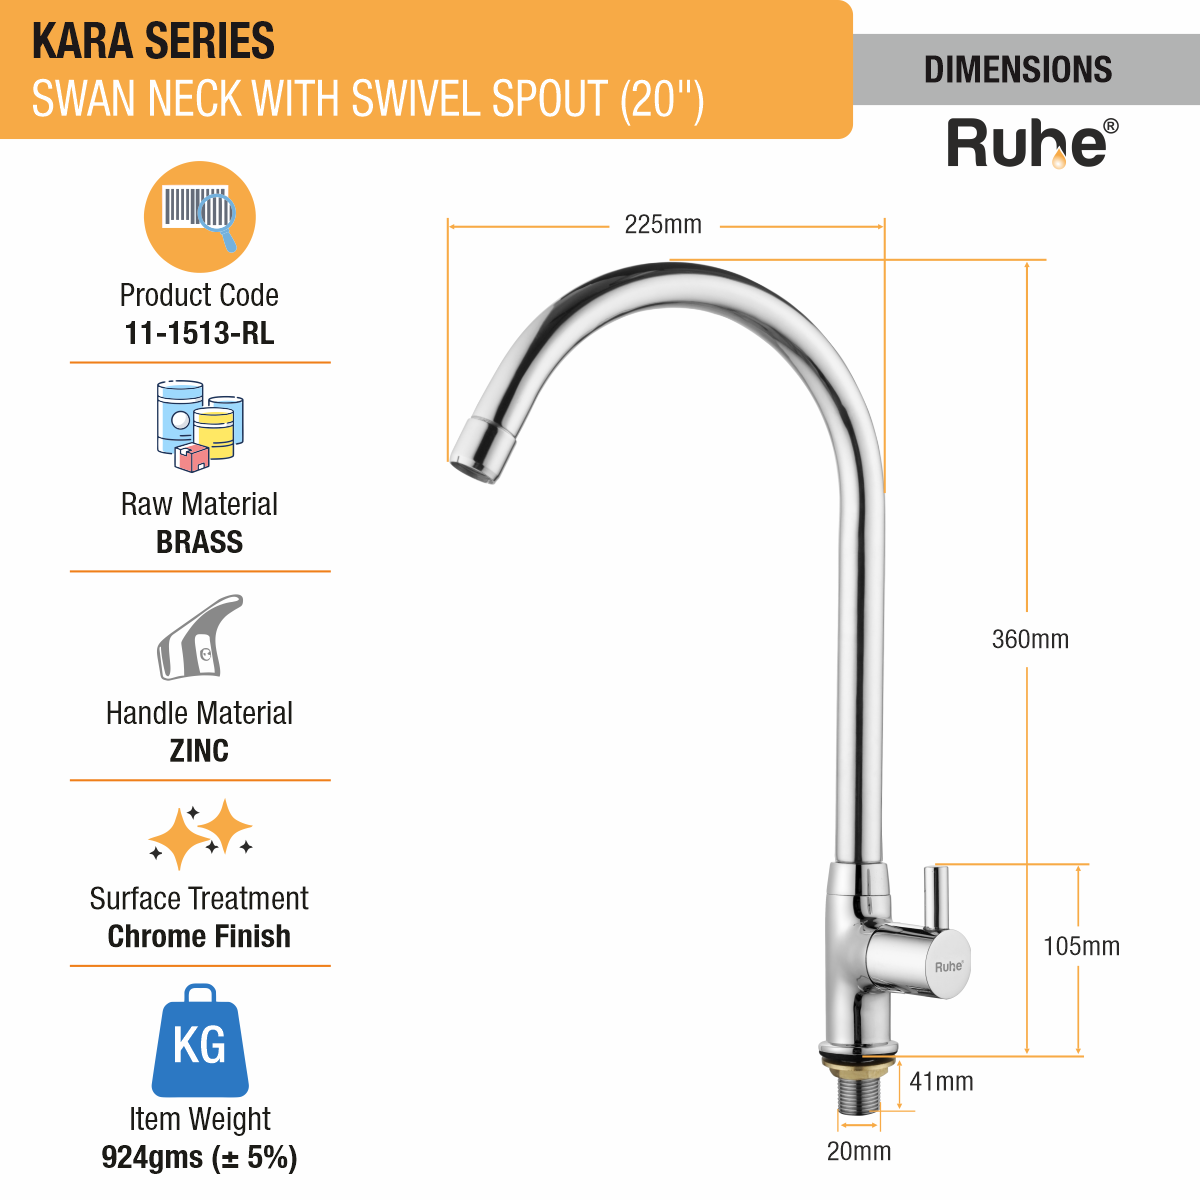 Kara Swan Neck with Large (20 inches) Round Swivel Spout Faucet dimensions and size